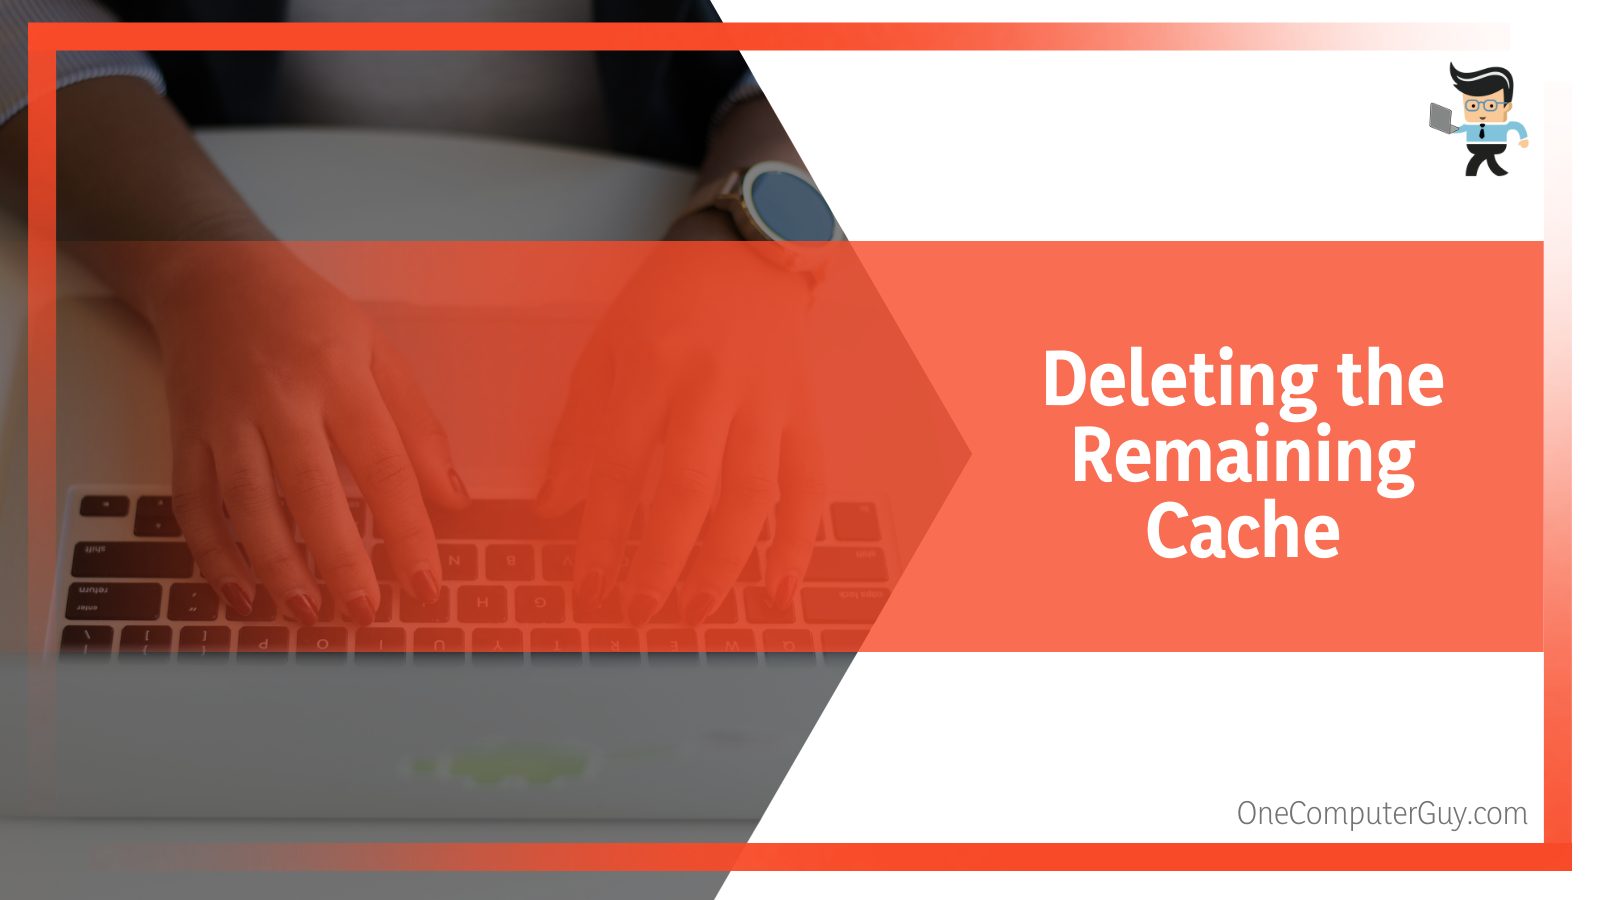 Deleting the Remaining Cache